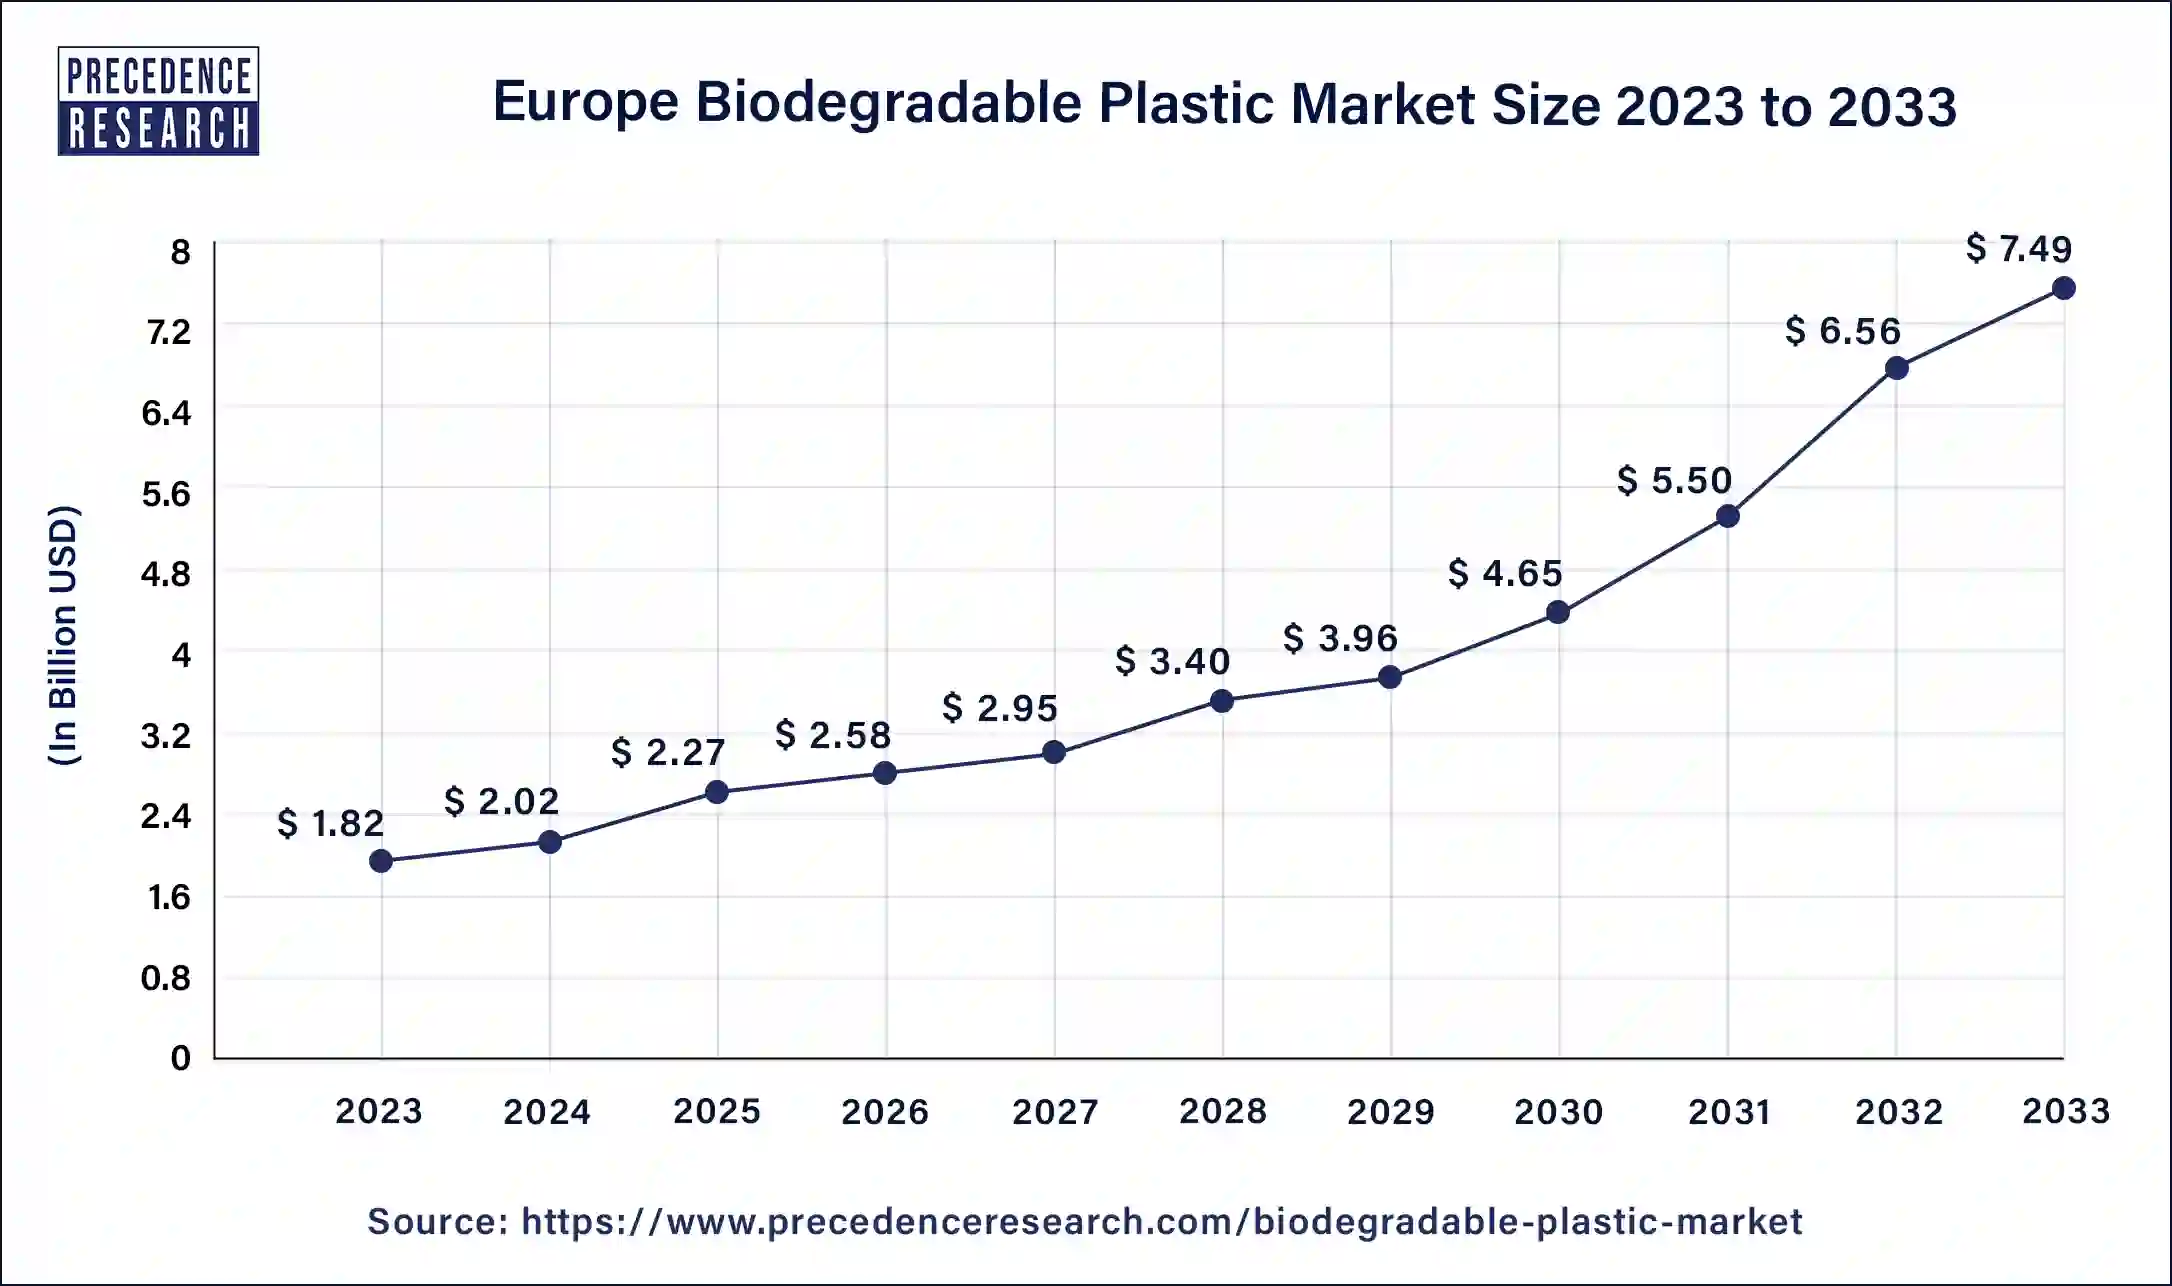 Europe Biodegradable Plastic Market Size 2024 to 2033